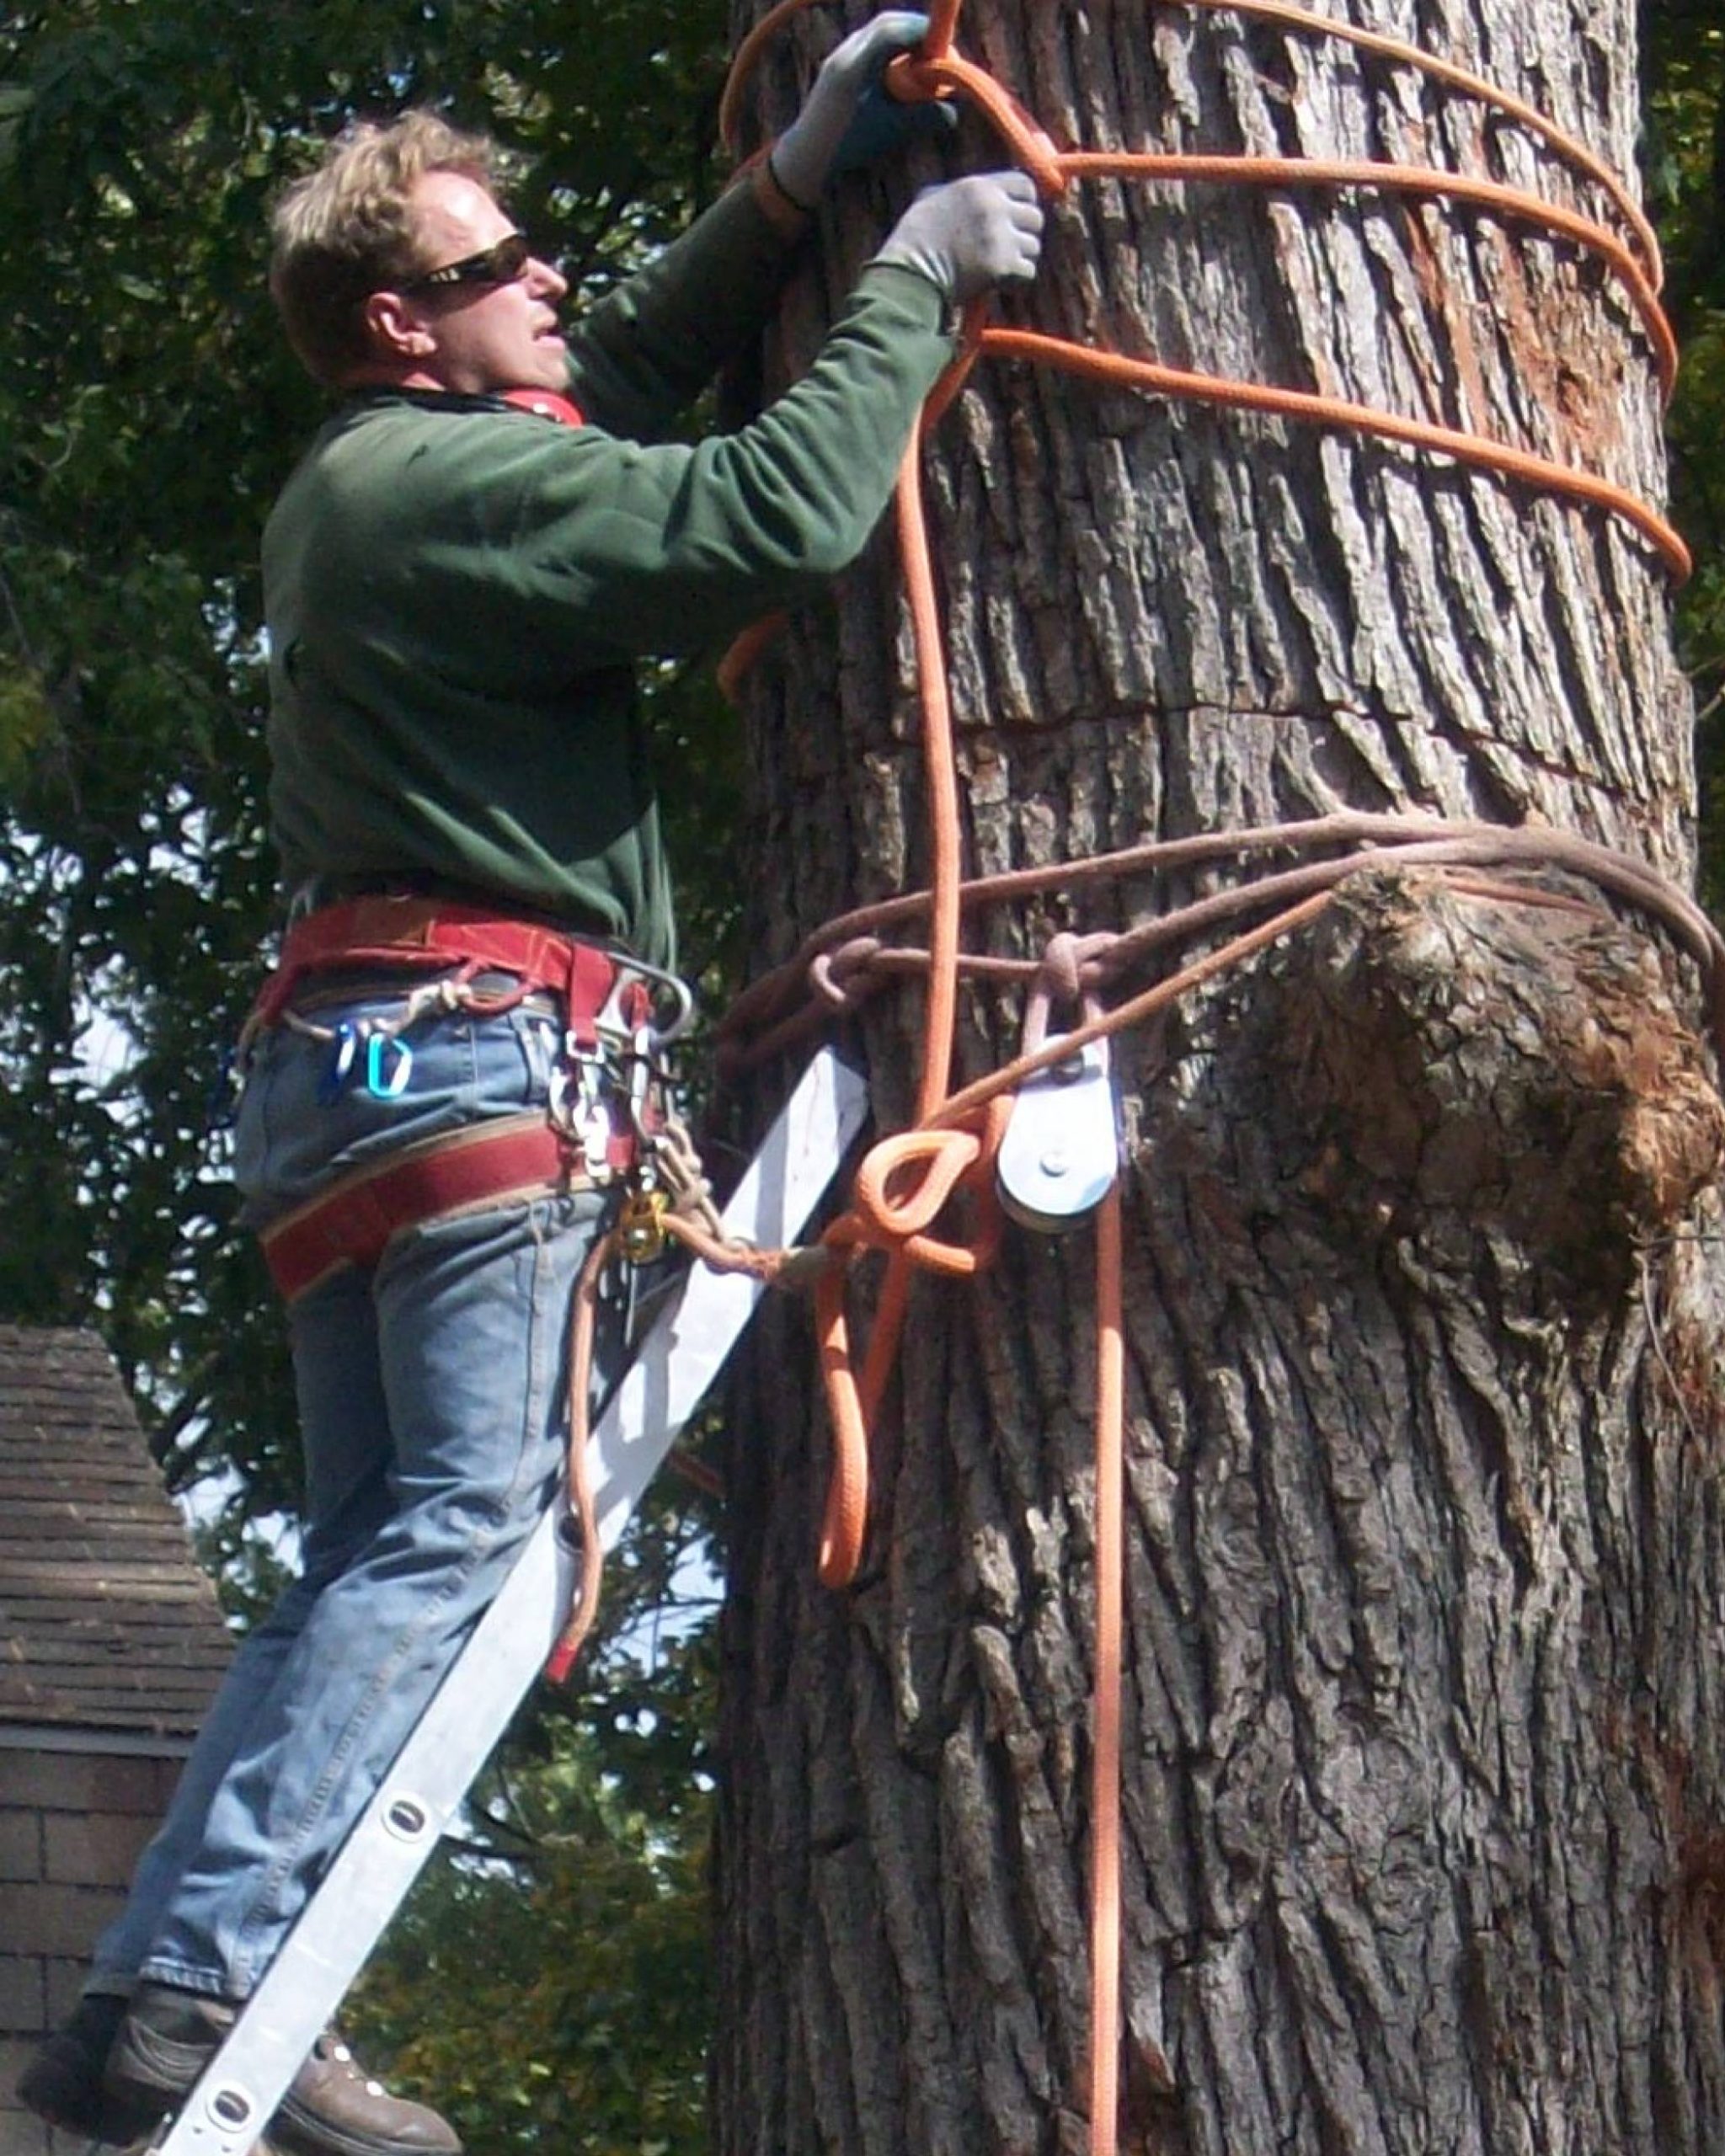 Beaver Dam Tree Service staff member standing on a letter attaching cables to a large tree to prepare for removal.